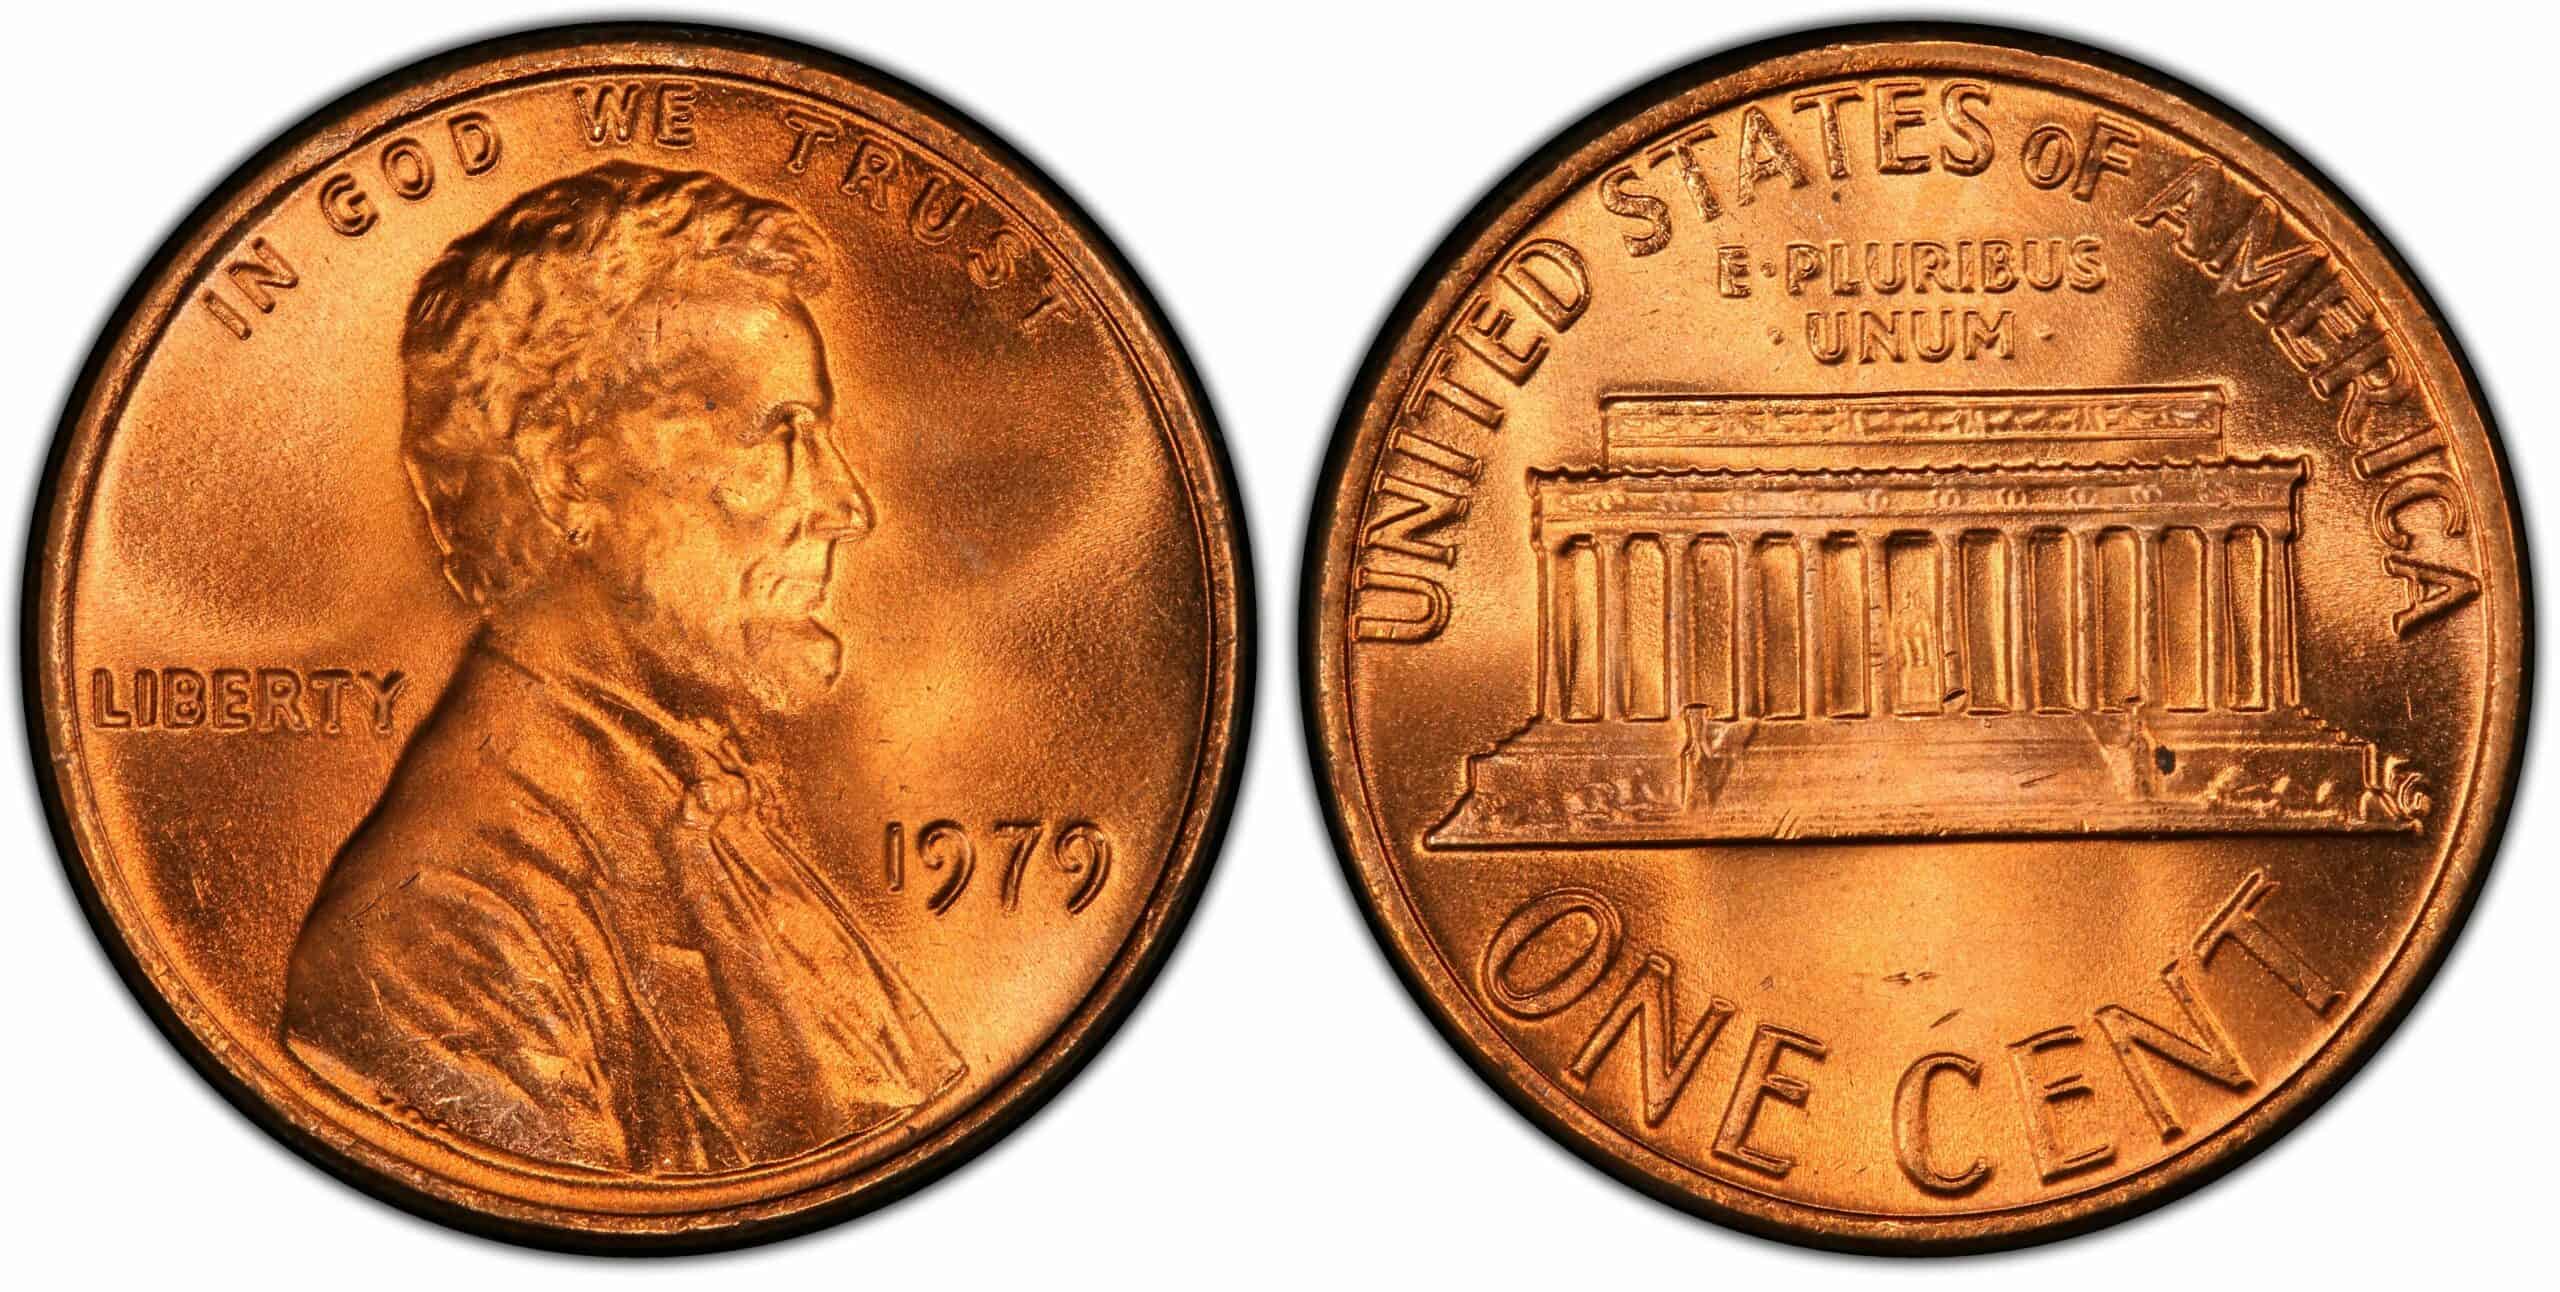 1979 Lincoln Penny Details